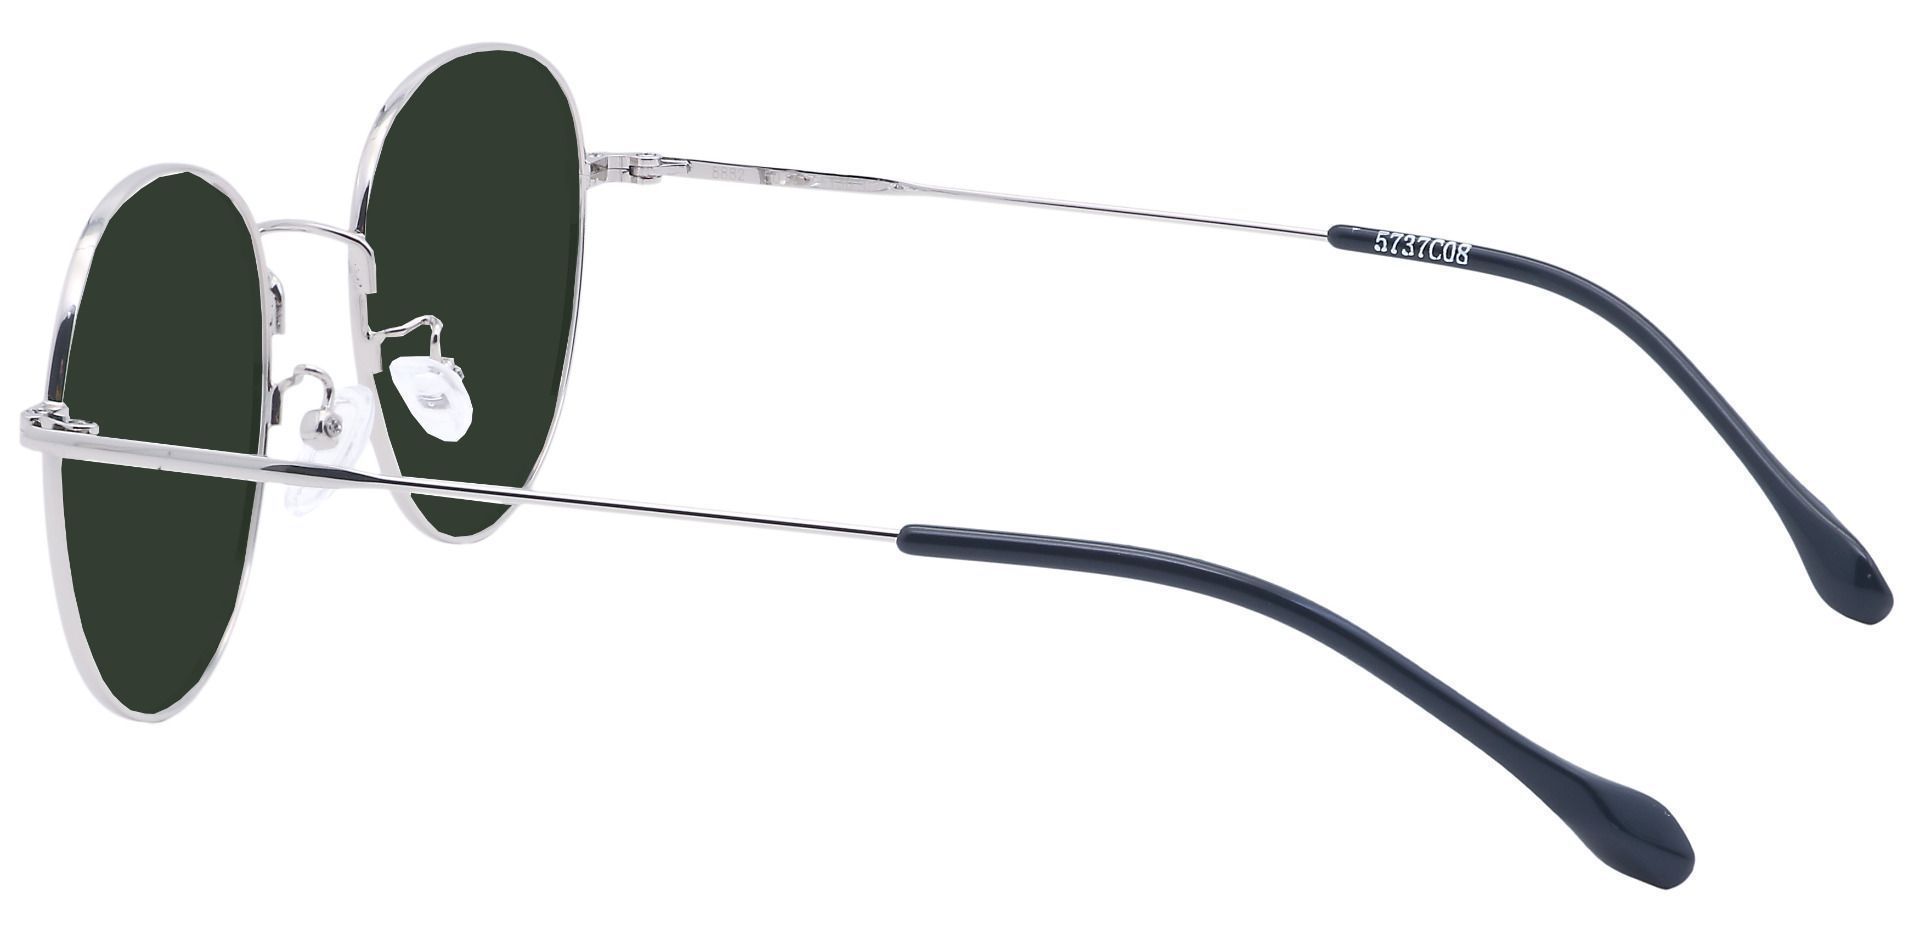 Miller Oval Non-Rx Sunglasses - Gray Frame With Green Lenses